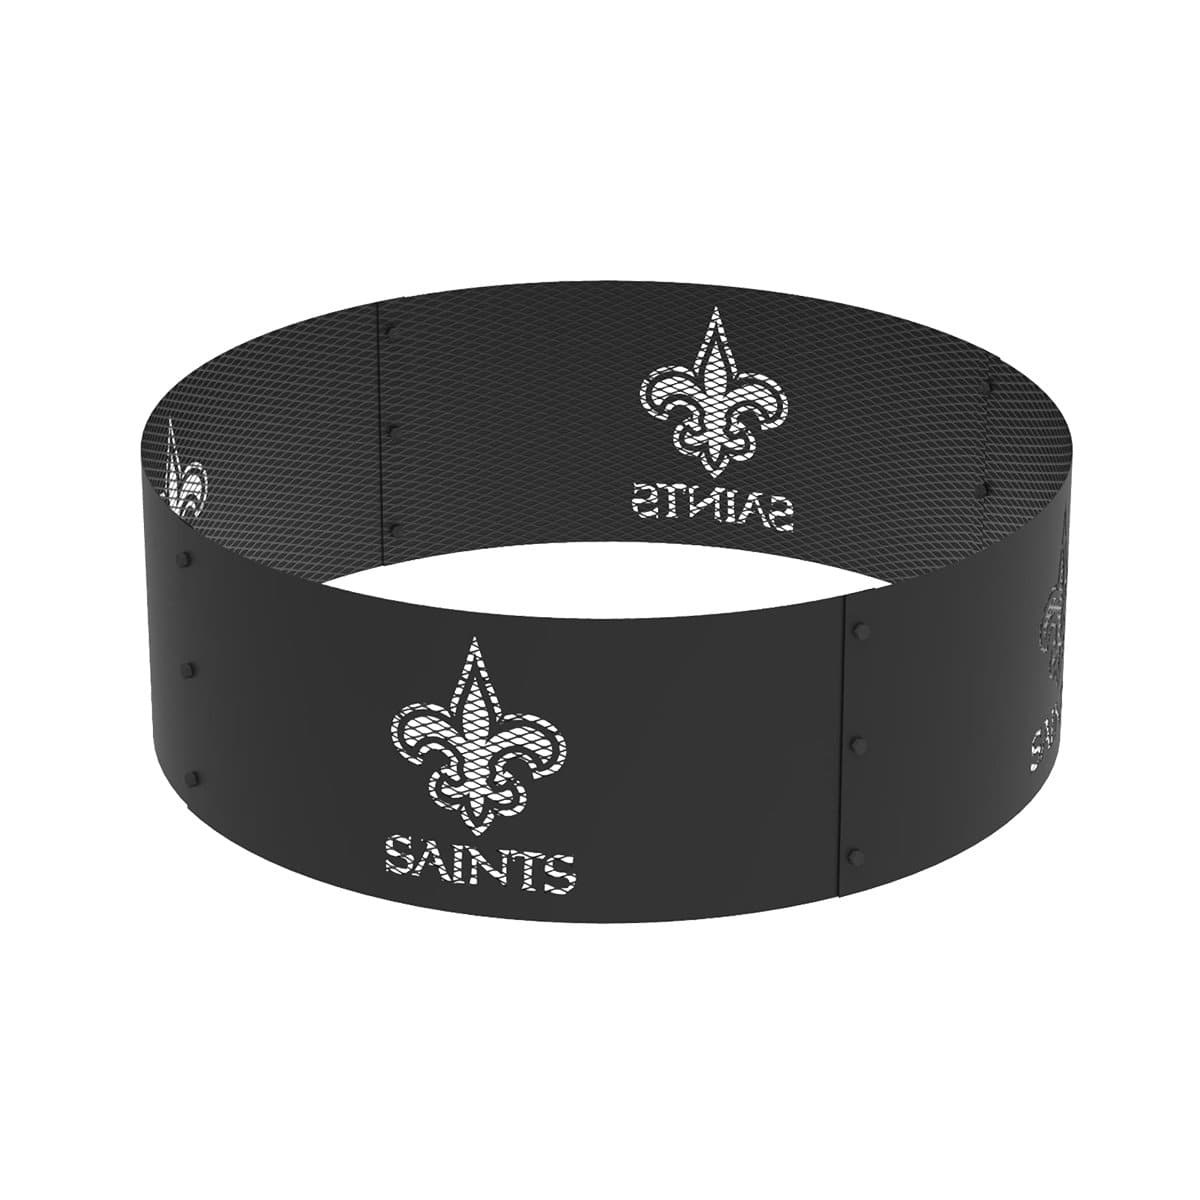 Blue Sky Outdoor Fire Pits - NFL Licensed New Orleans Saints - Senior.com Fire Pits